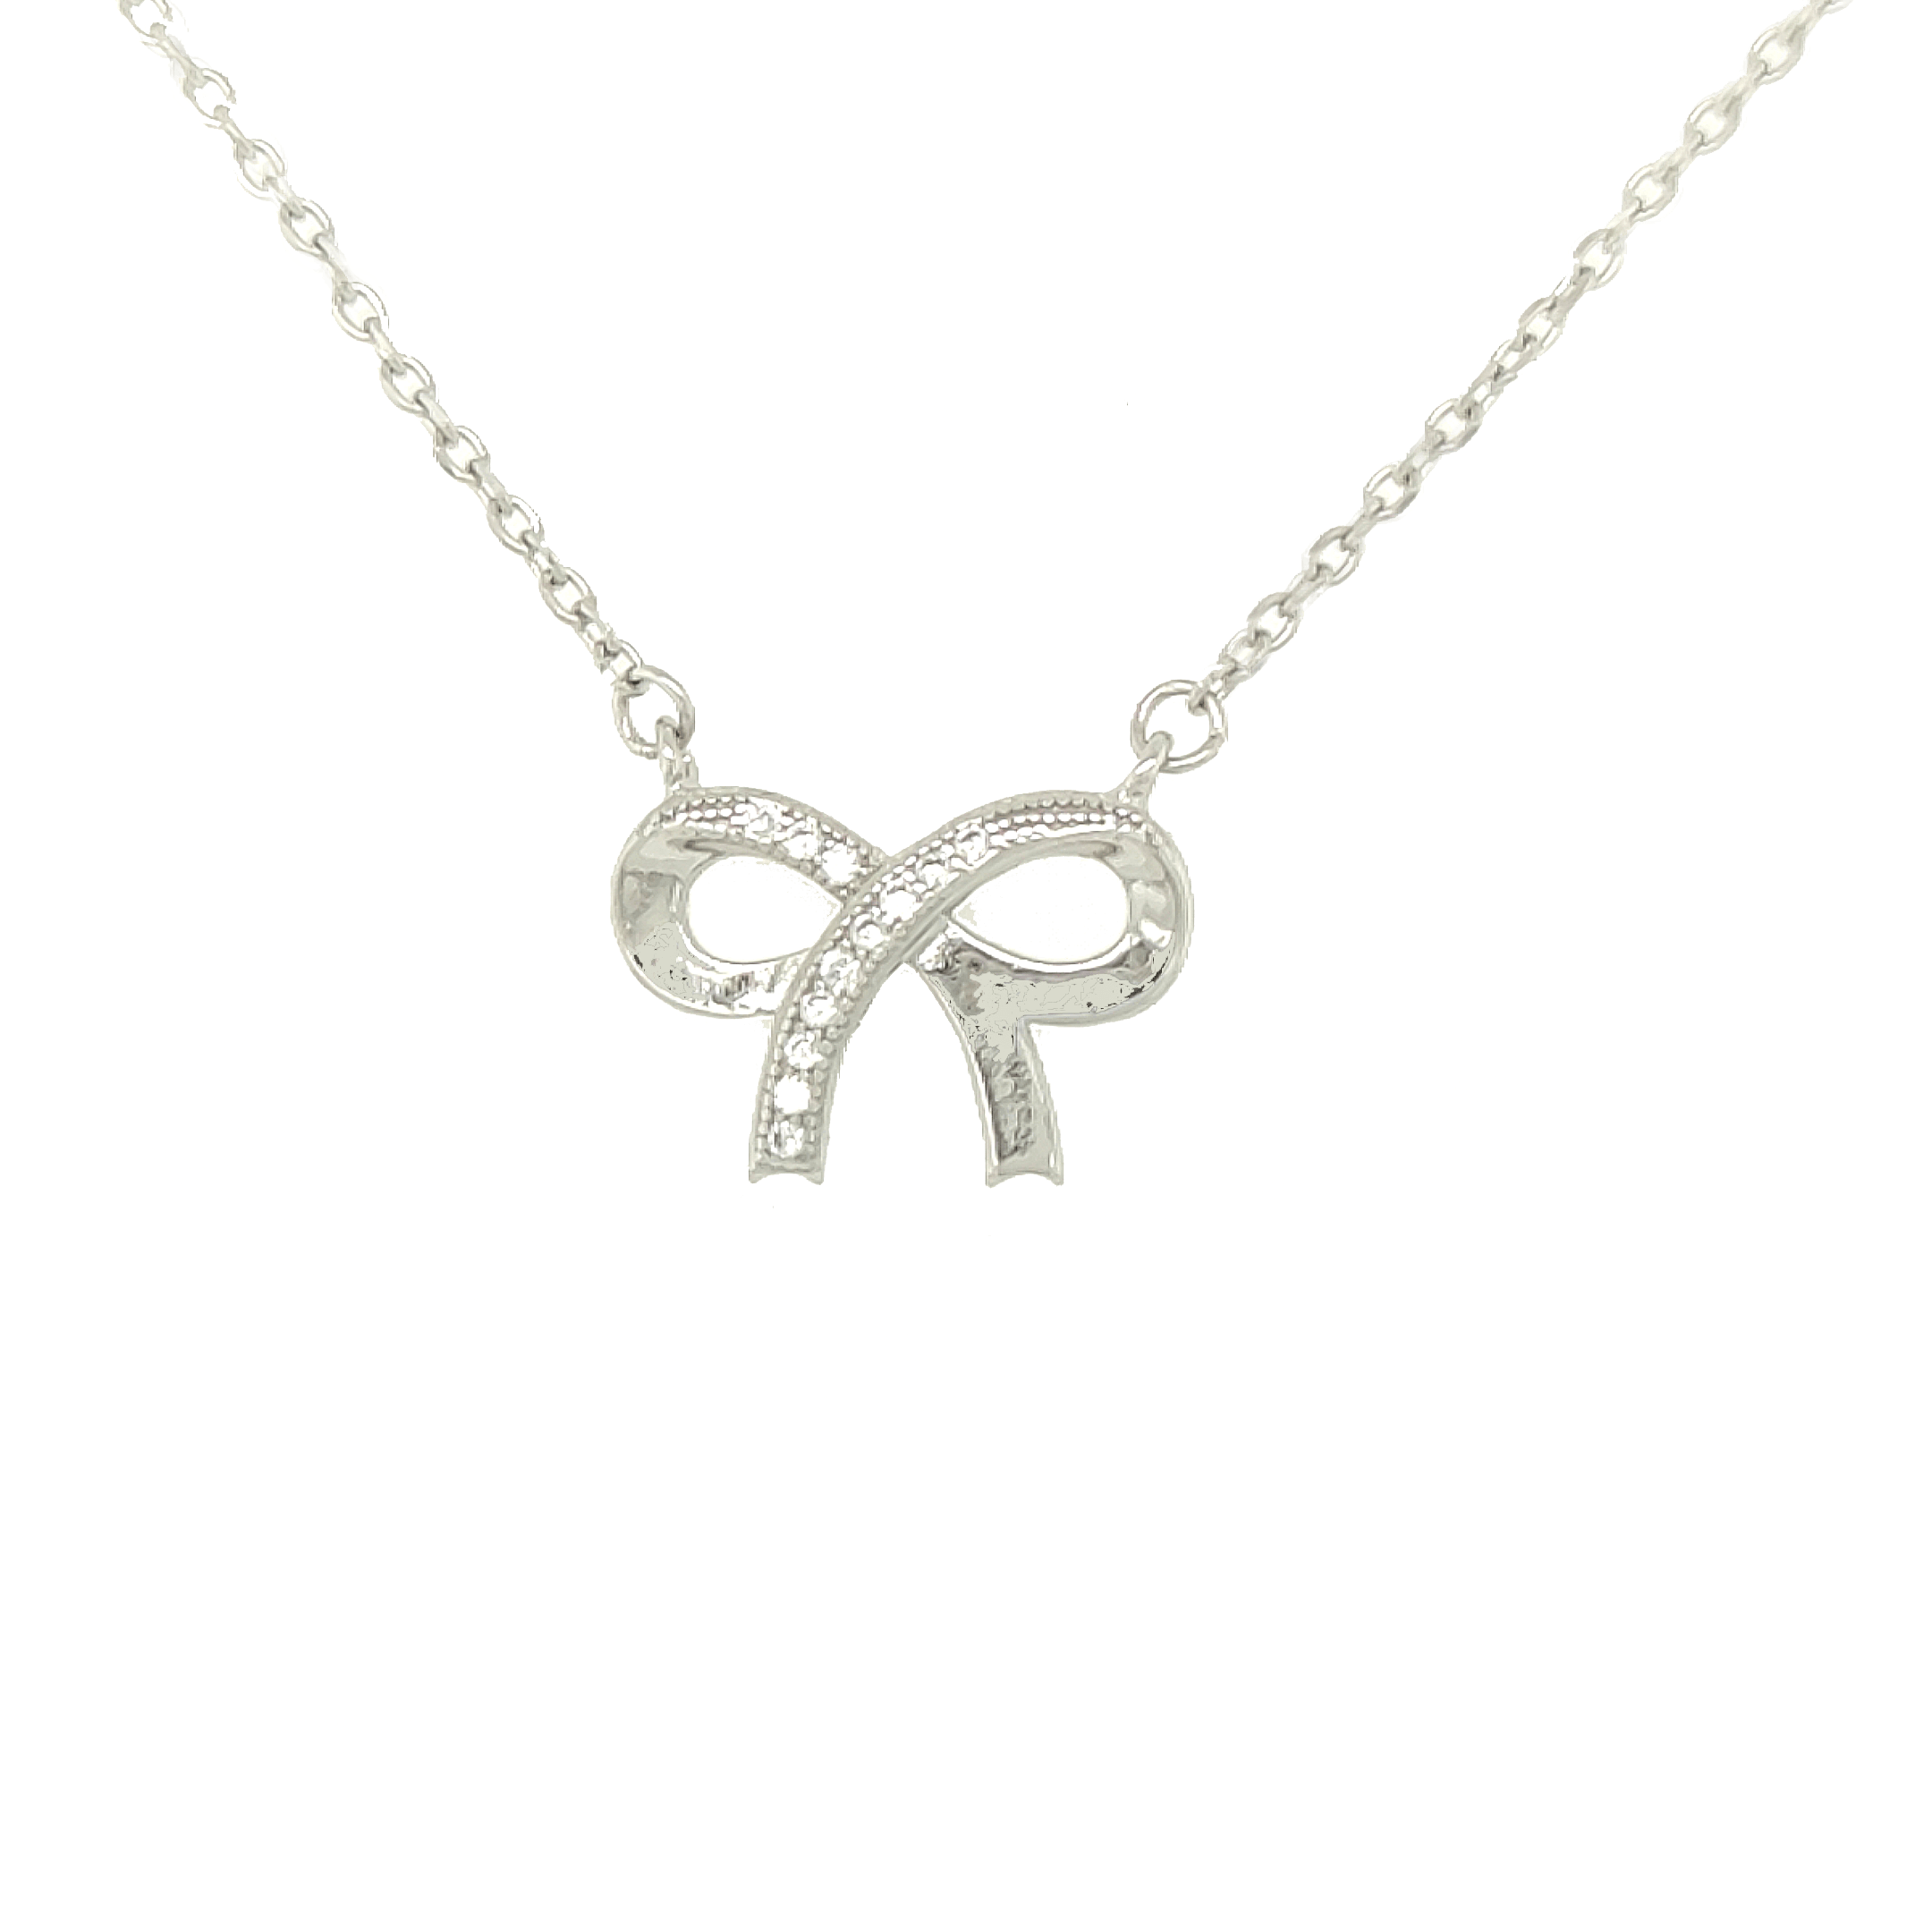 Asfour-Crystal-Sterling-Silver-925-Necklace-N1804